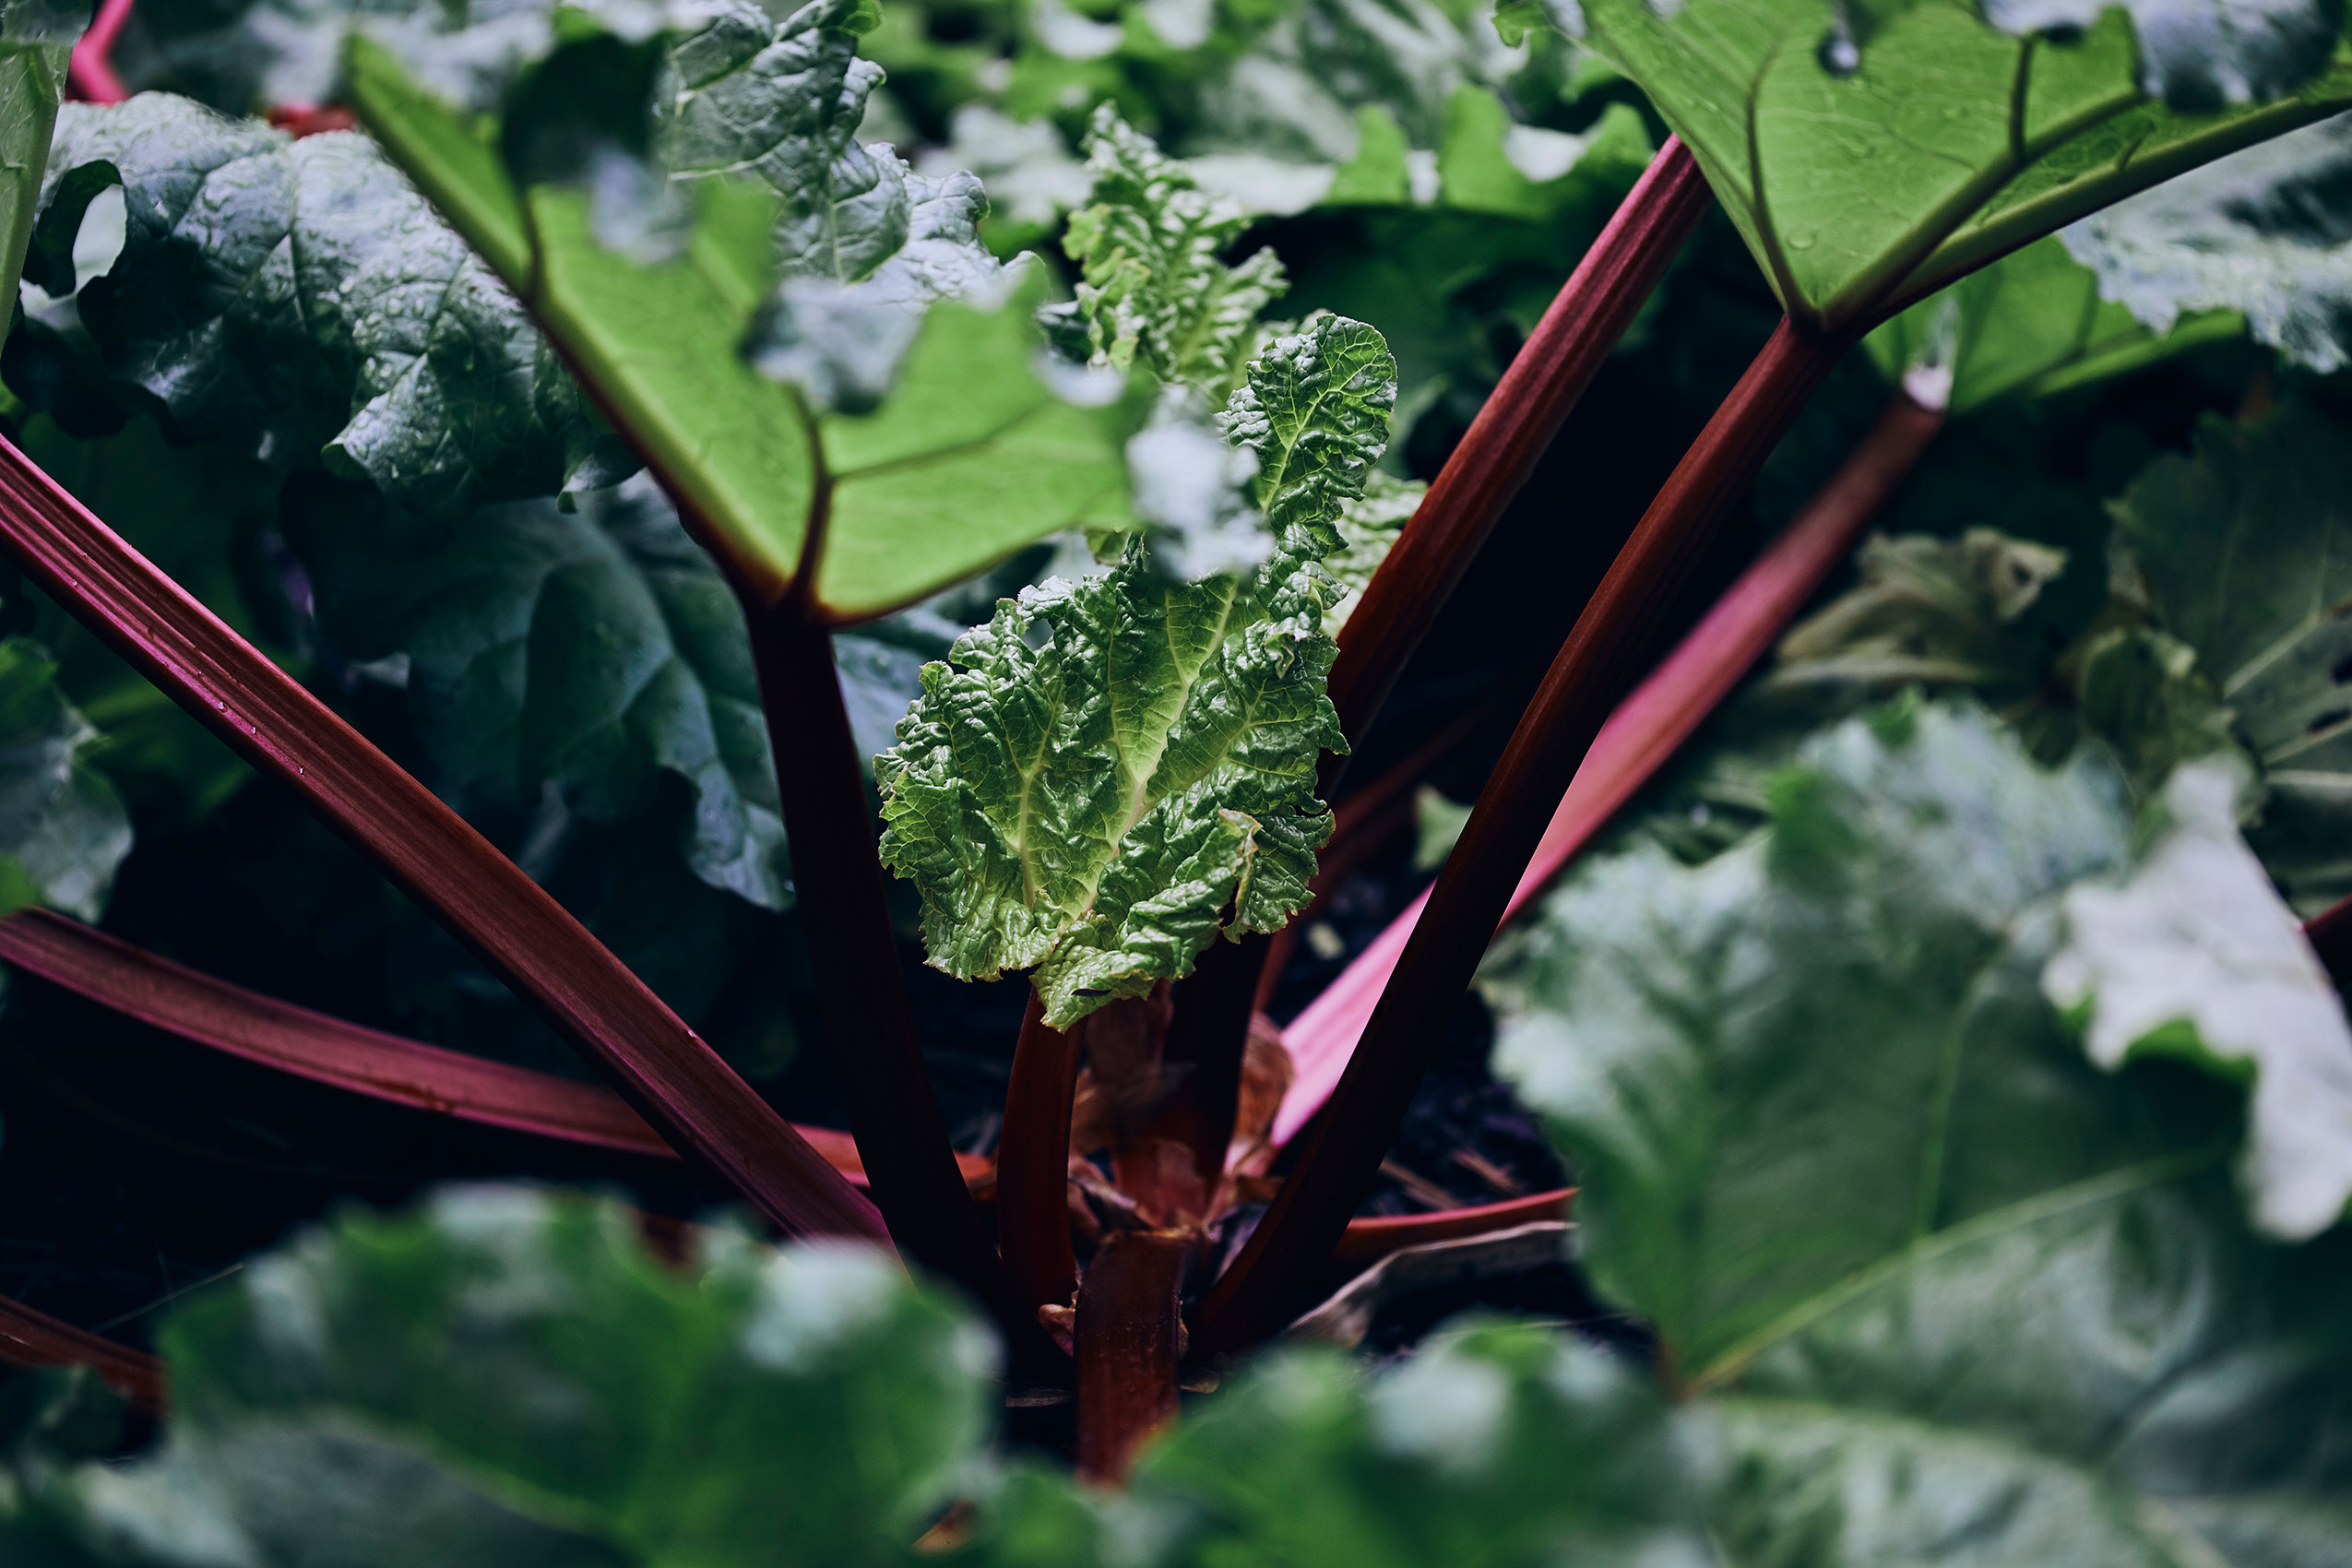 Shared Kitchen • Deep Red Rhubarb Stems & Contrasting Green Foliage • Lifestyle & Editorial Food Photography